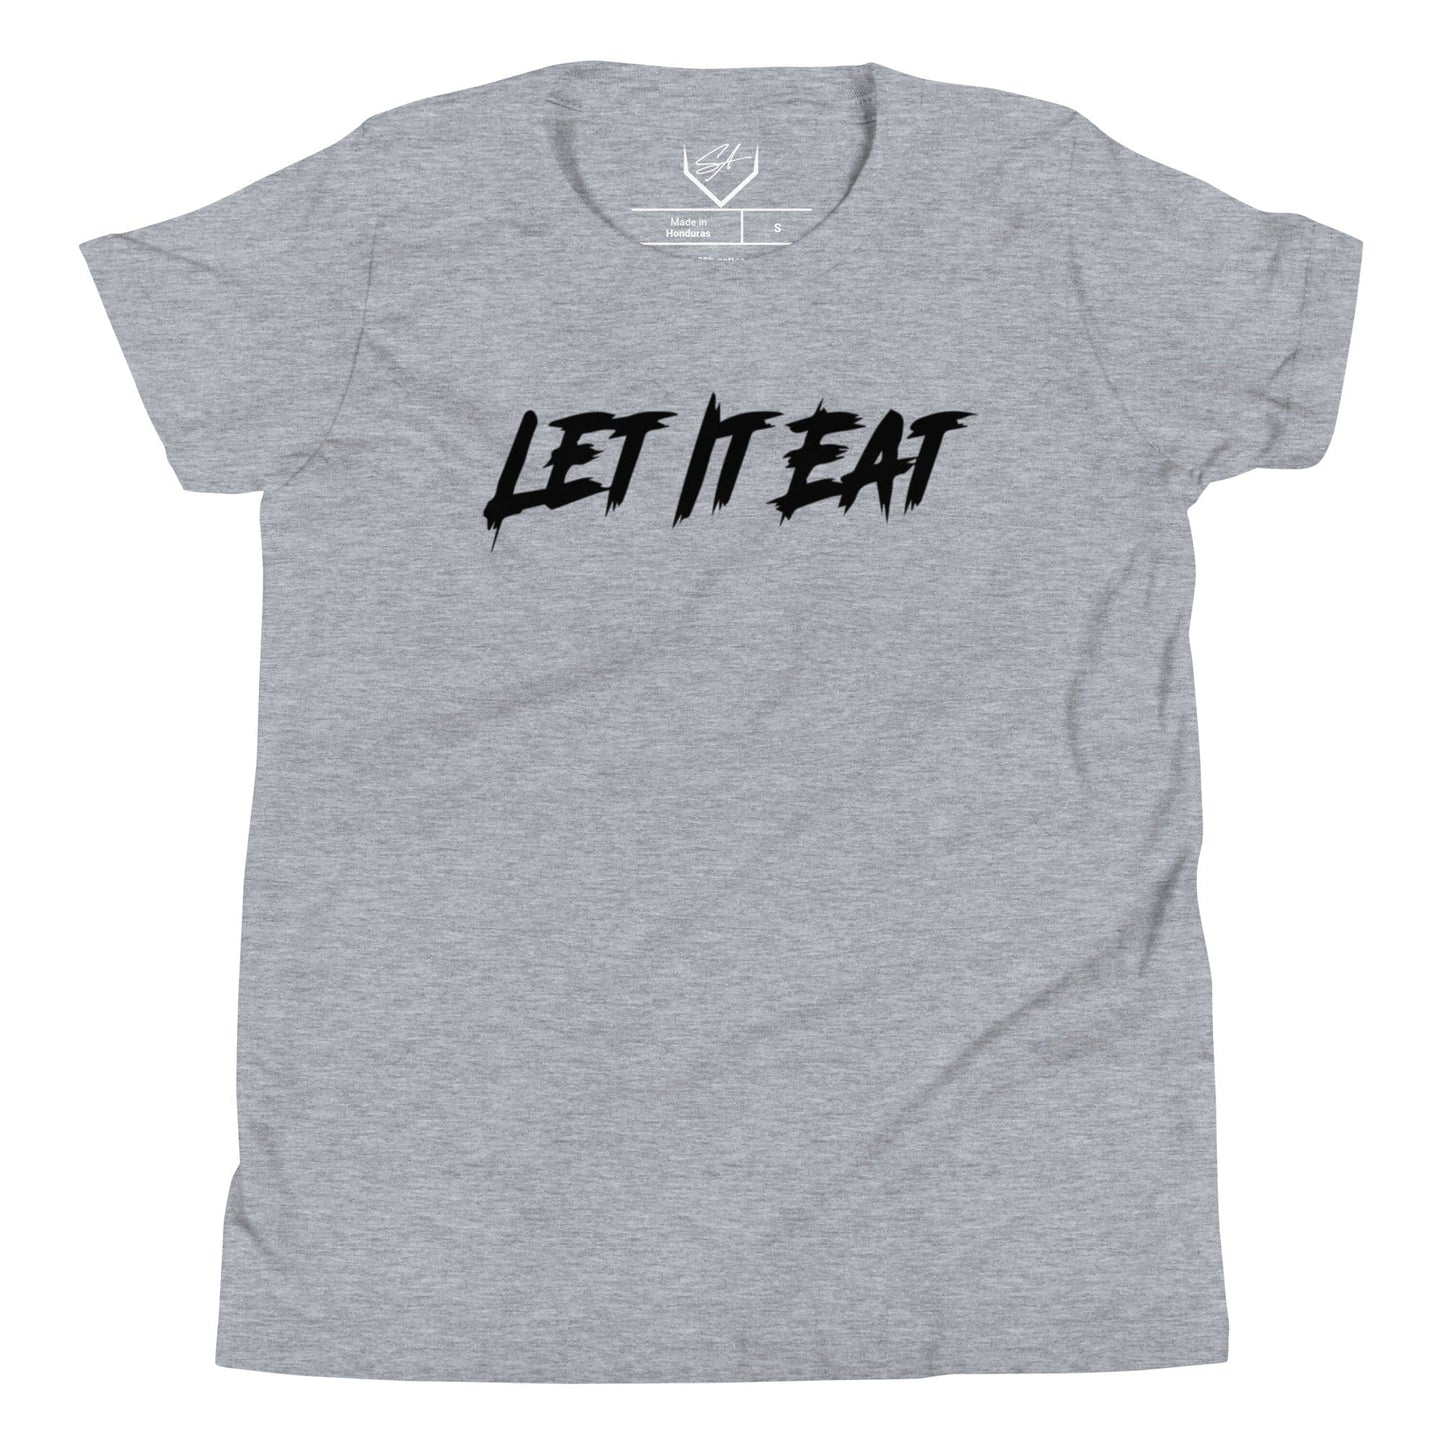 Let it Eat - Youth Tee